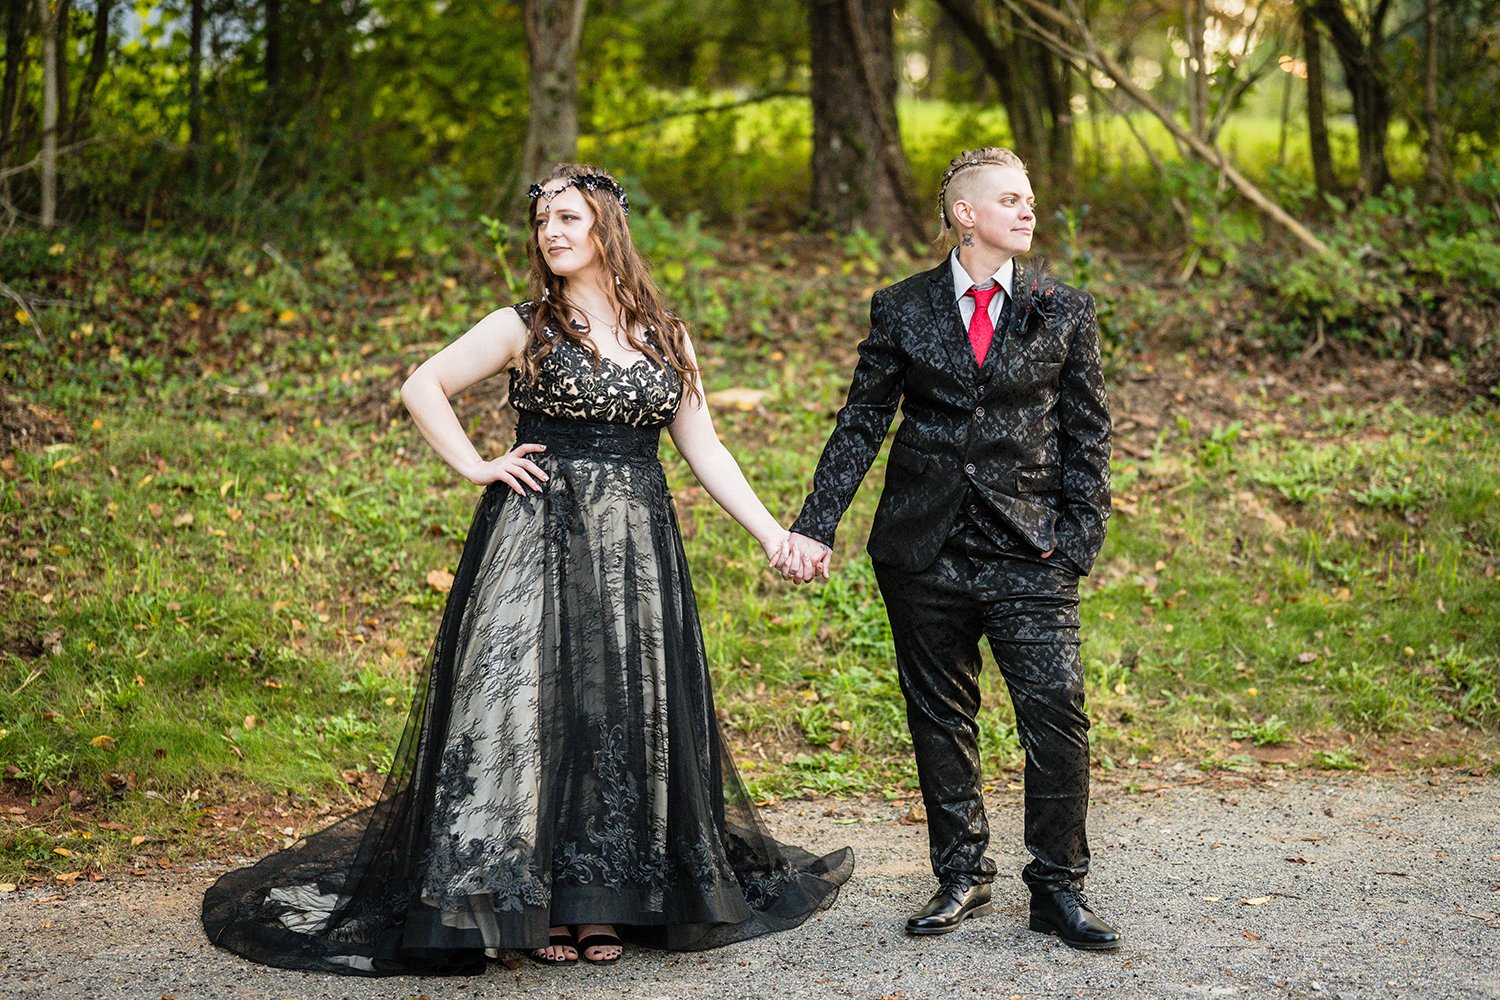 A lesbian bride wearing a black wedding dress and another queer marrier wearing a black floral suit stand hand in hand and look opposite directions during their Roanoke airbnb elopement.